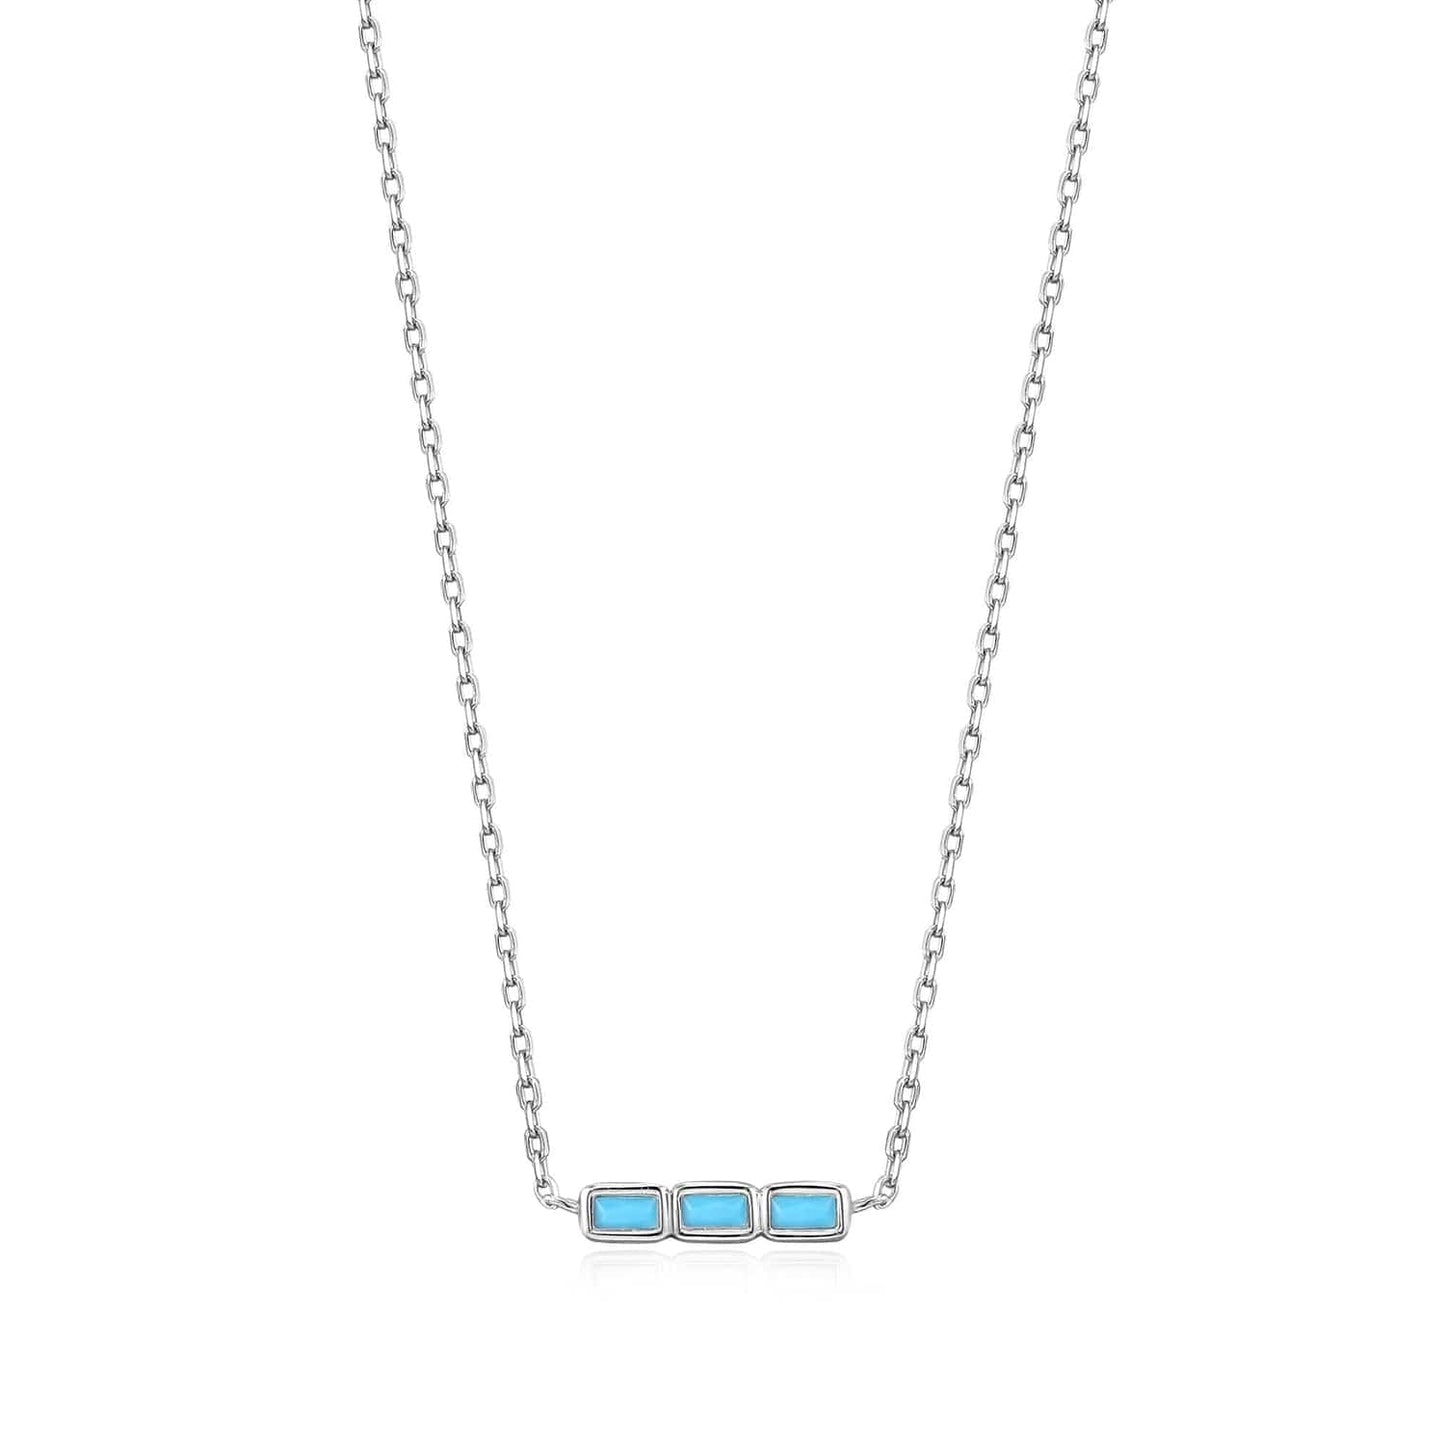 NKL Turquoise Silver Bar Necklace